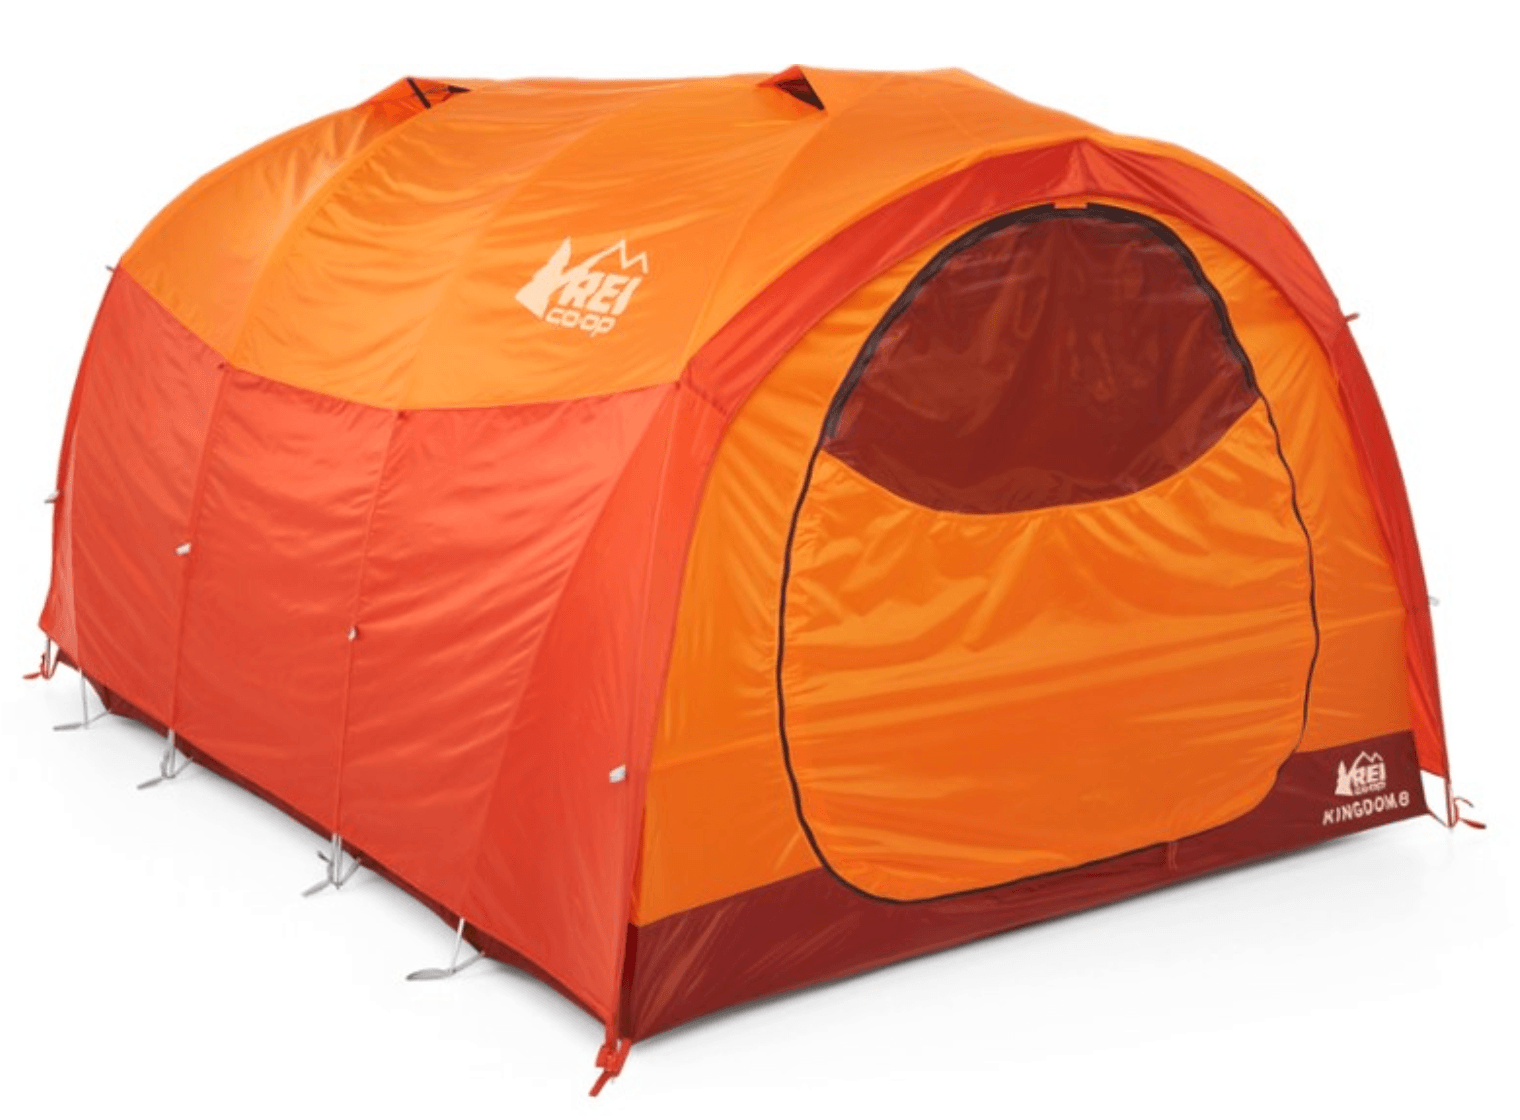 Best 8 Person Tents of 2022 • Find the PERFECT Group Camping Solution